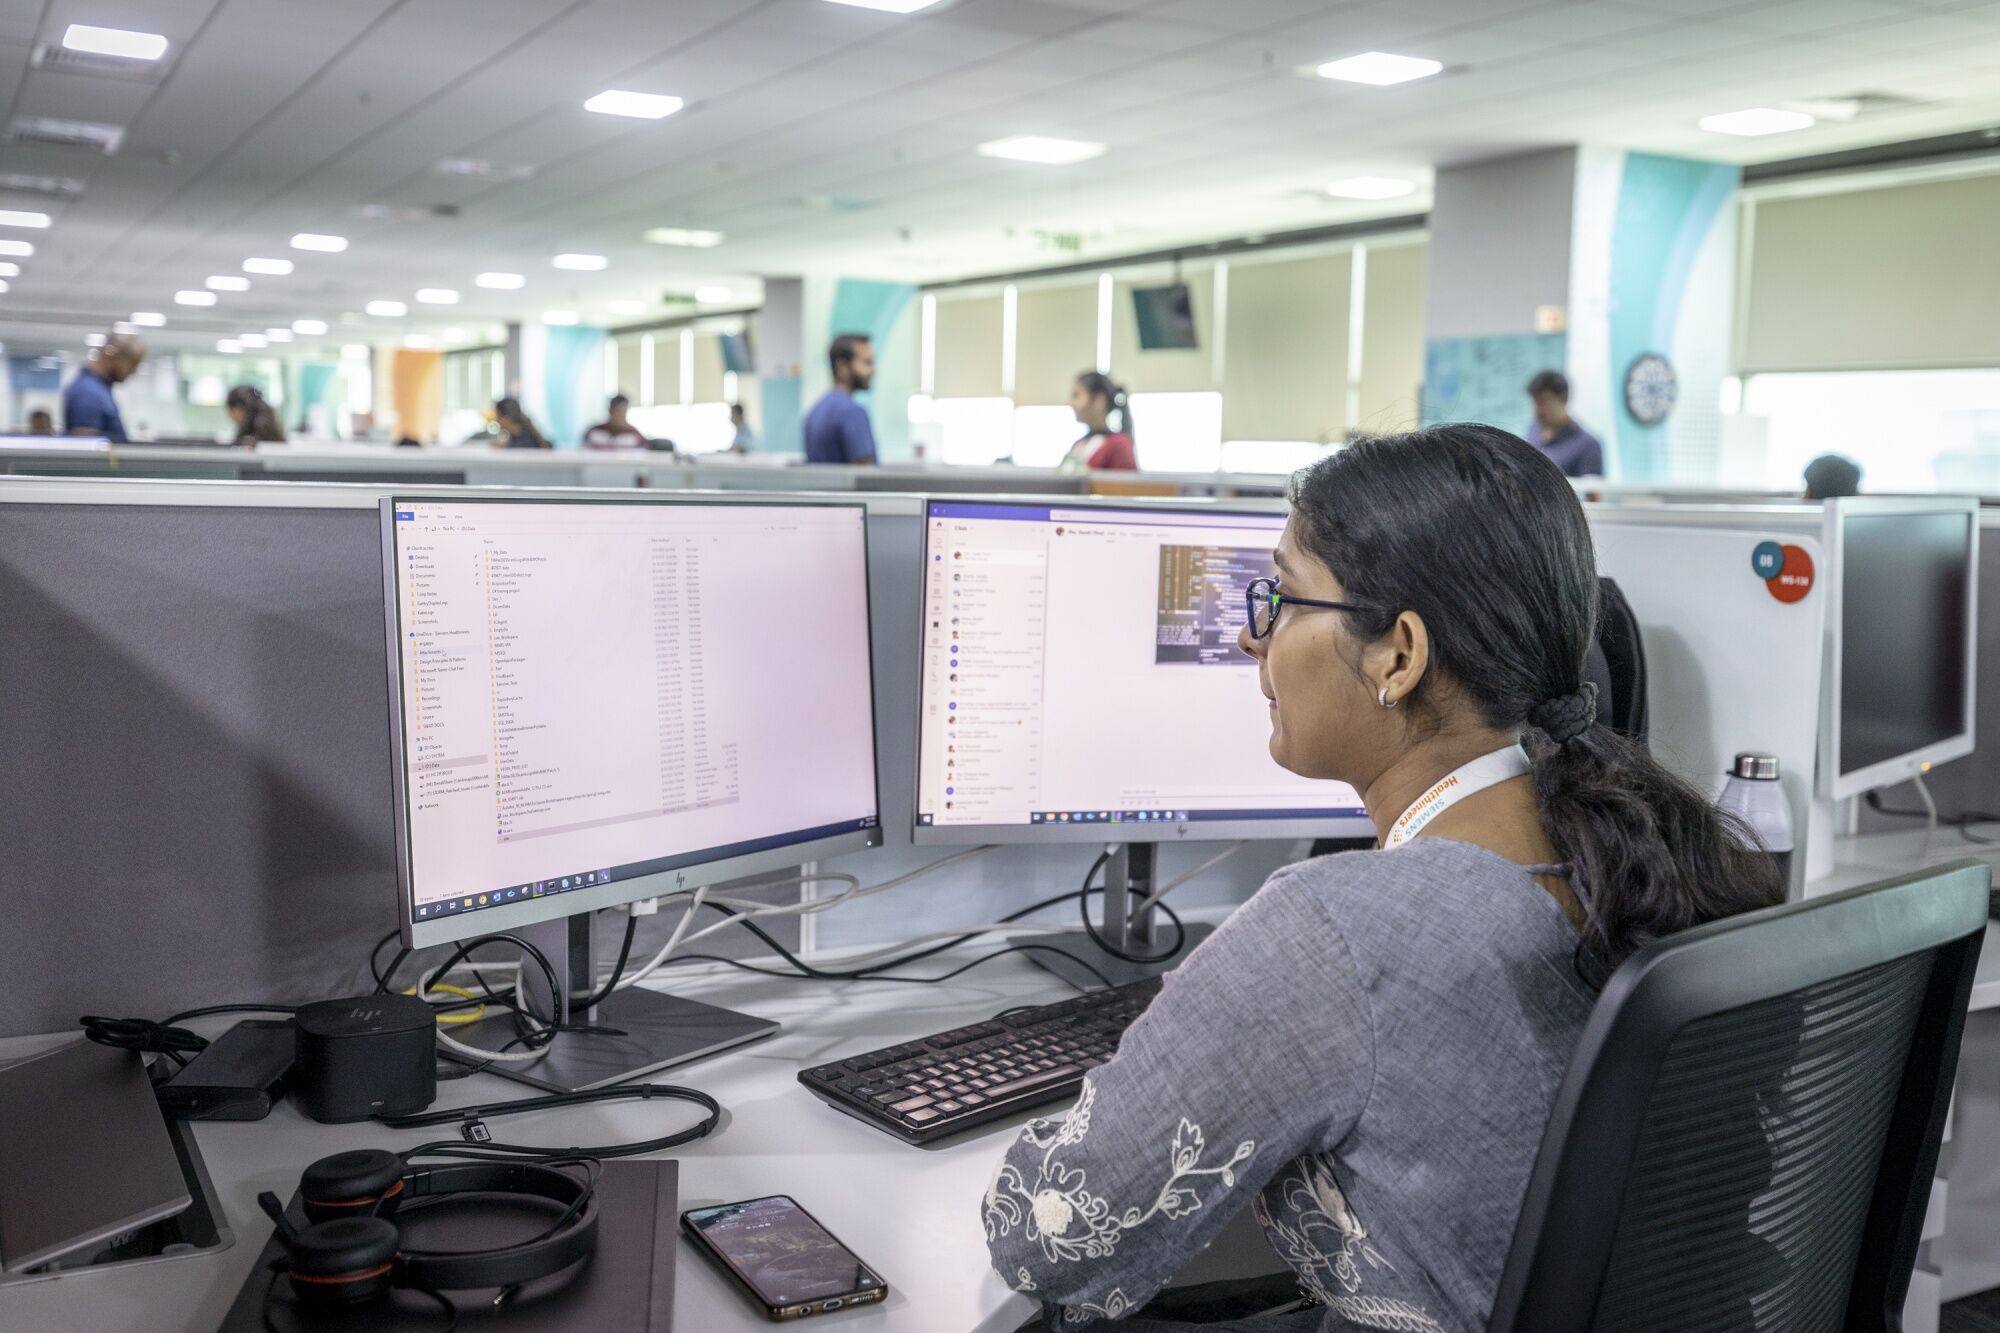 Workers are seen at the Siemens Healthineers AG global capability centre in Bangalore earlier this year. Across India, the offices set up by multinationals to provide cheap operational support are now taking on more sophisticated roles. Photo: Bloomberg